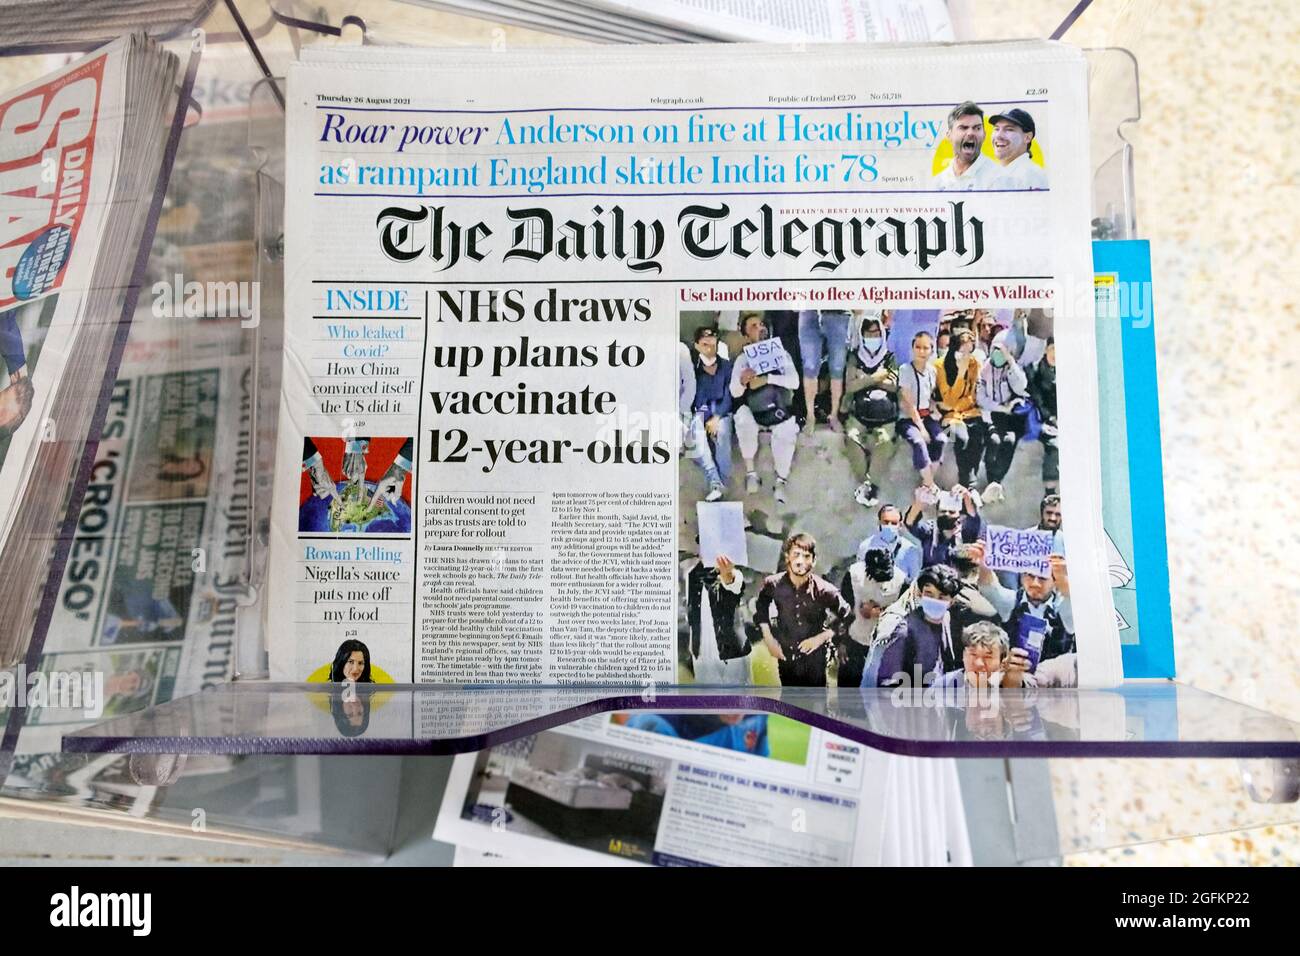 Daily Telegraph front page Covid 19 coronavirus pandemic newspaper headline 'NHS draws up plans to vaccinate 12-year-olds' 26 August 2021  London UK Stock Photo